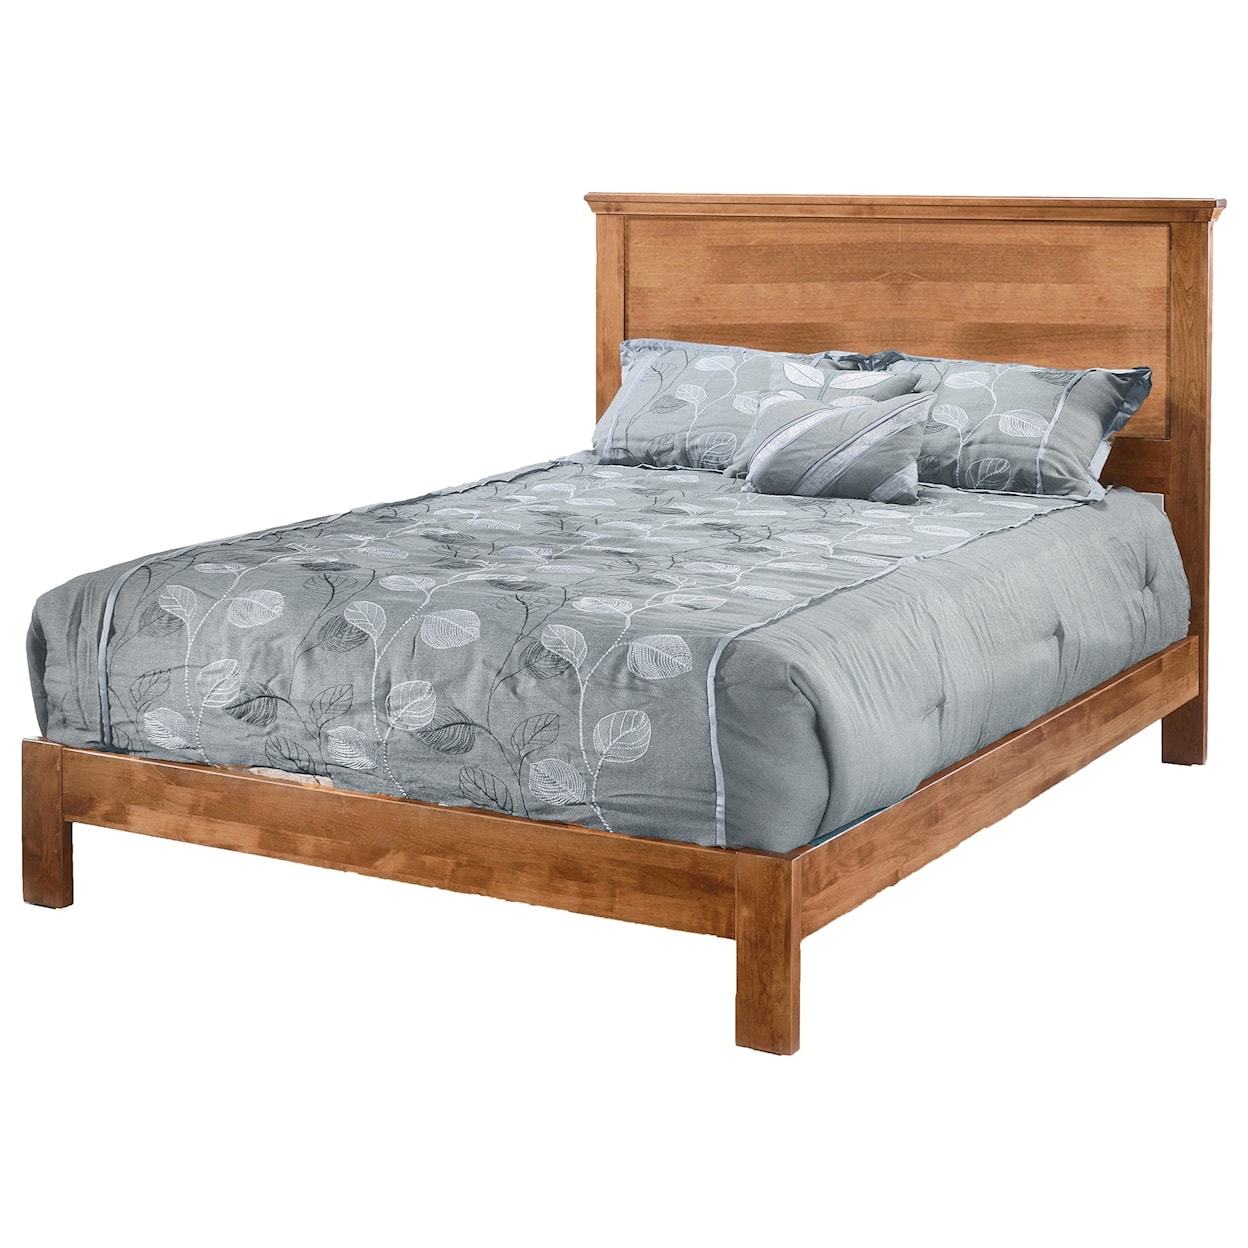 Archbold Furniture Misc. Beds King Plank Bed